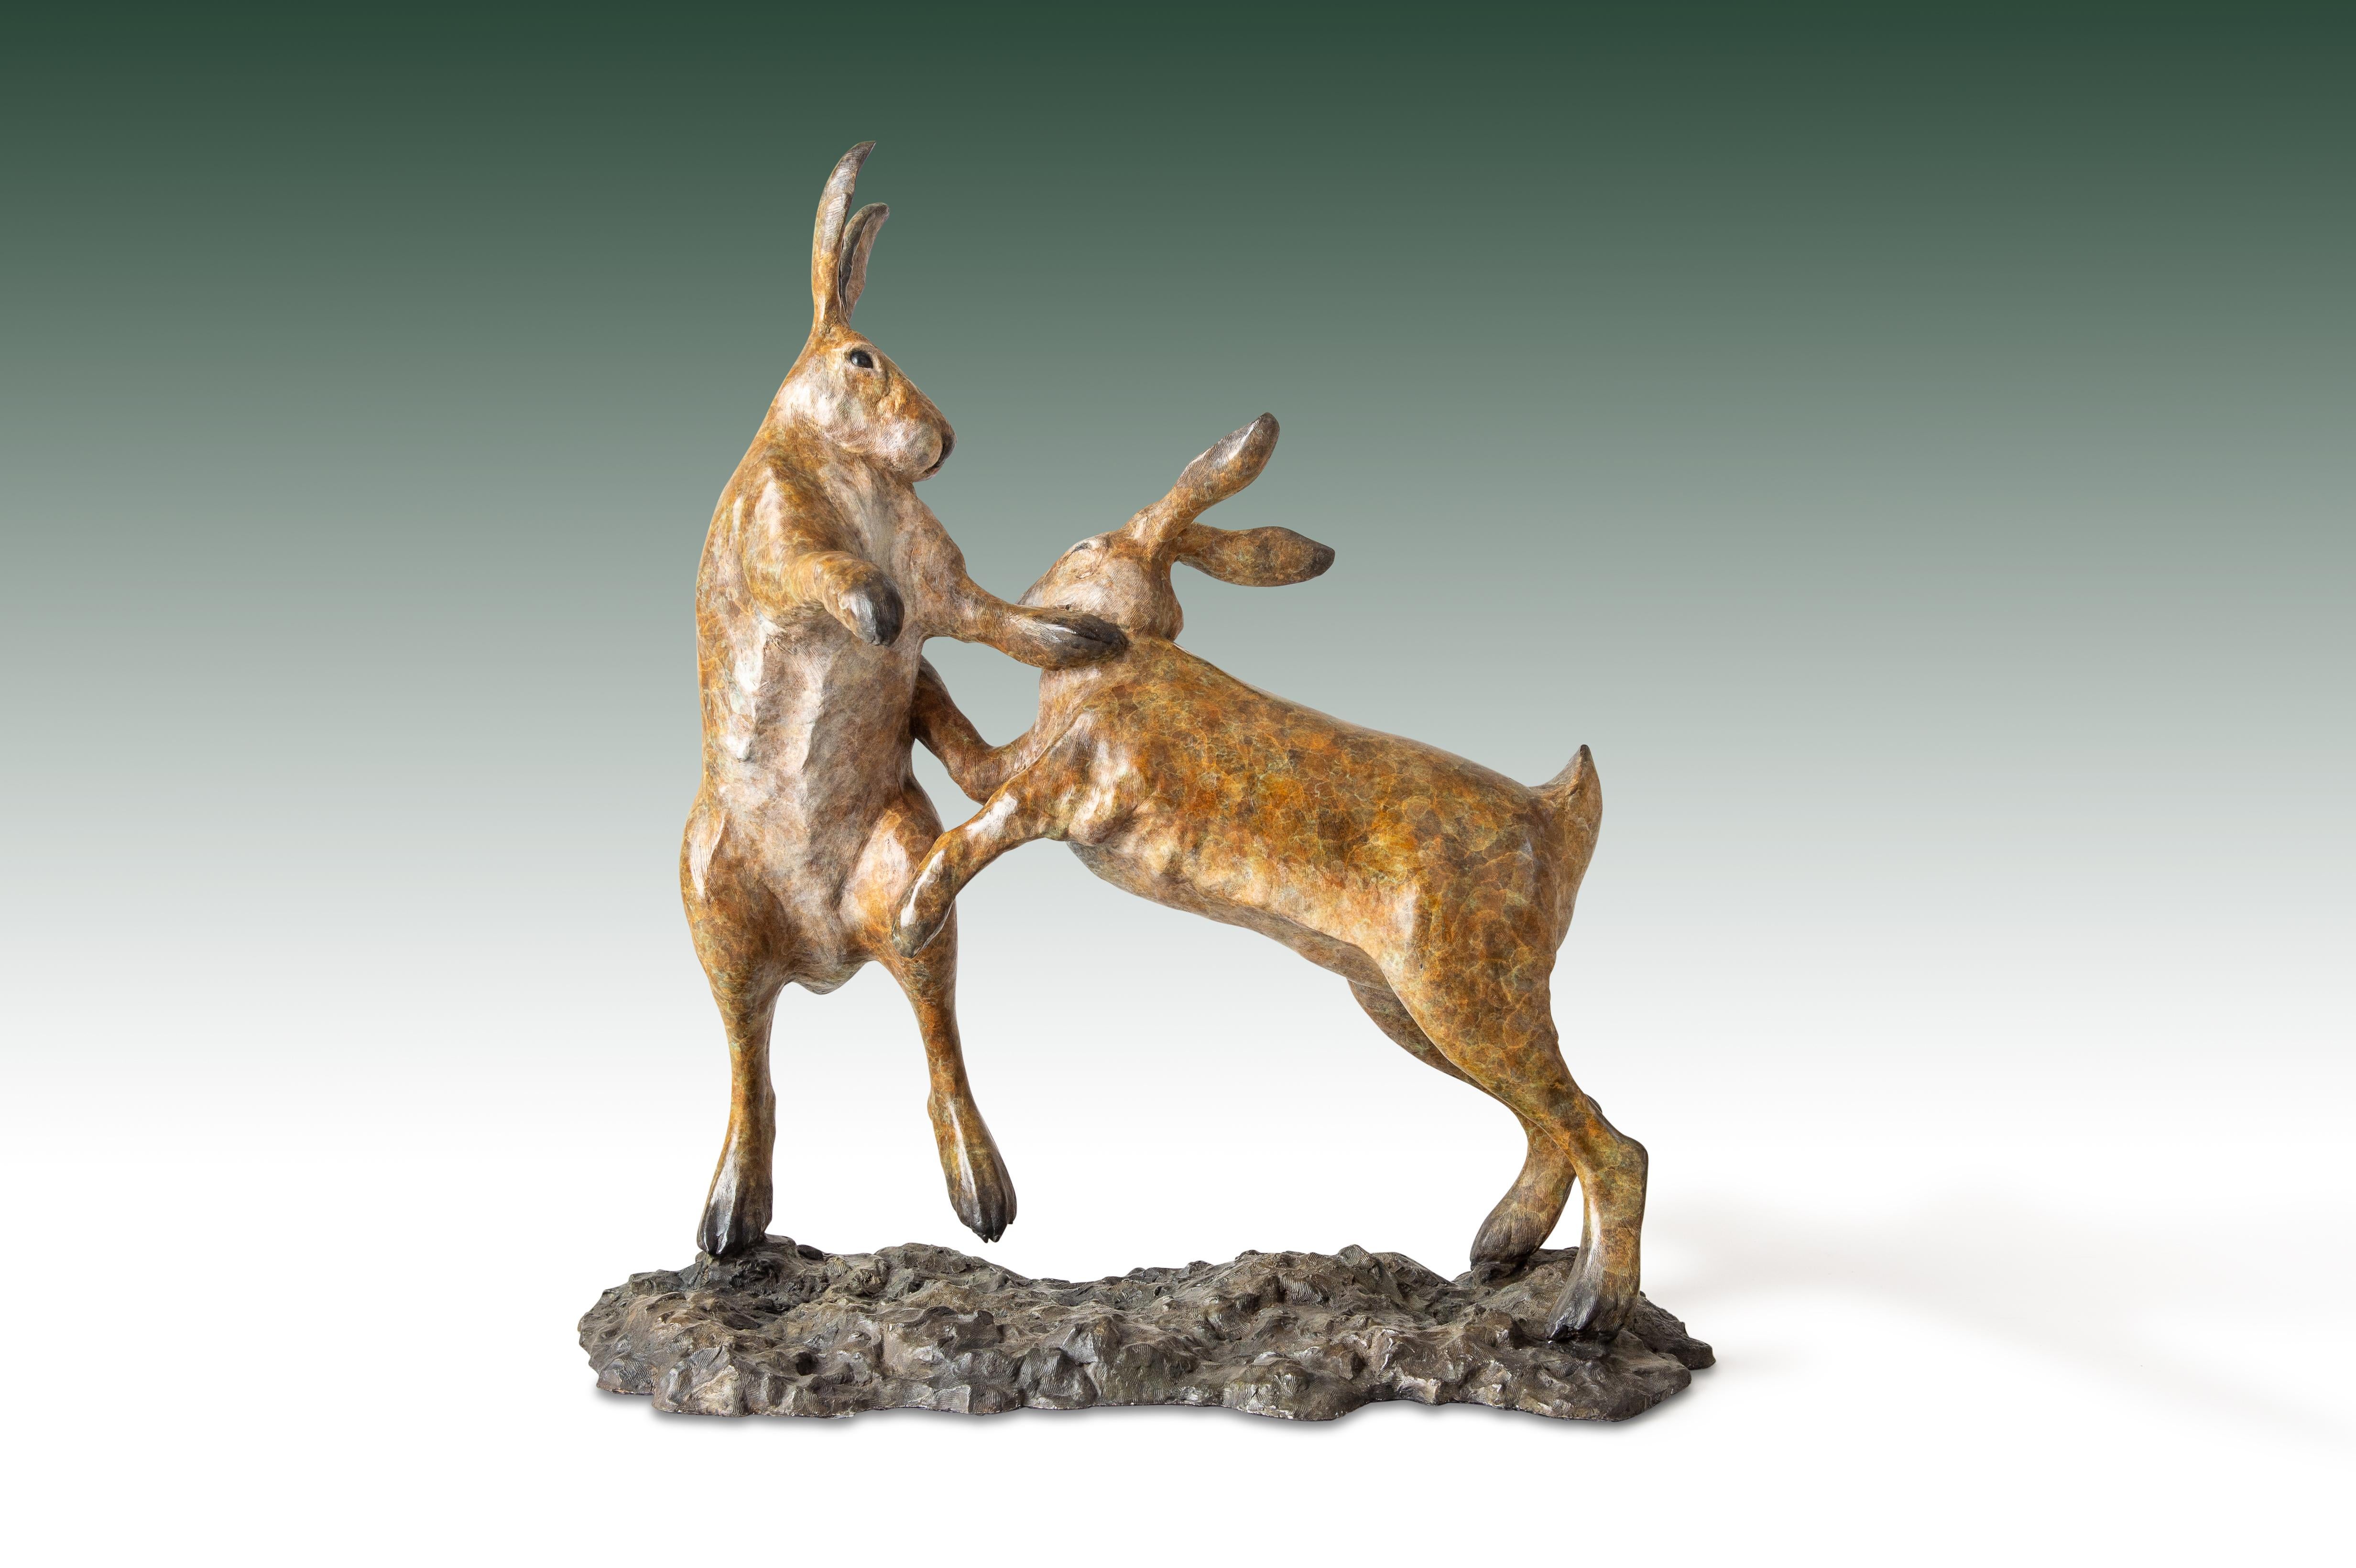 'Boxing Hares' by Tobias Martin is a Solid Bronze Animal Sculpture. 

Tobias Martin was born in 1972 in Wiltshire, 12 miles from Stonehenge. Influenced by his idyllic rural upbringing, and the forces of nature and magic that permeated his childhood